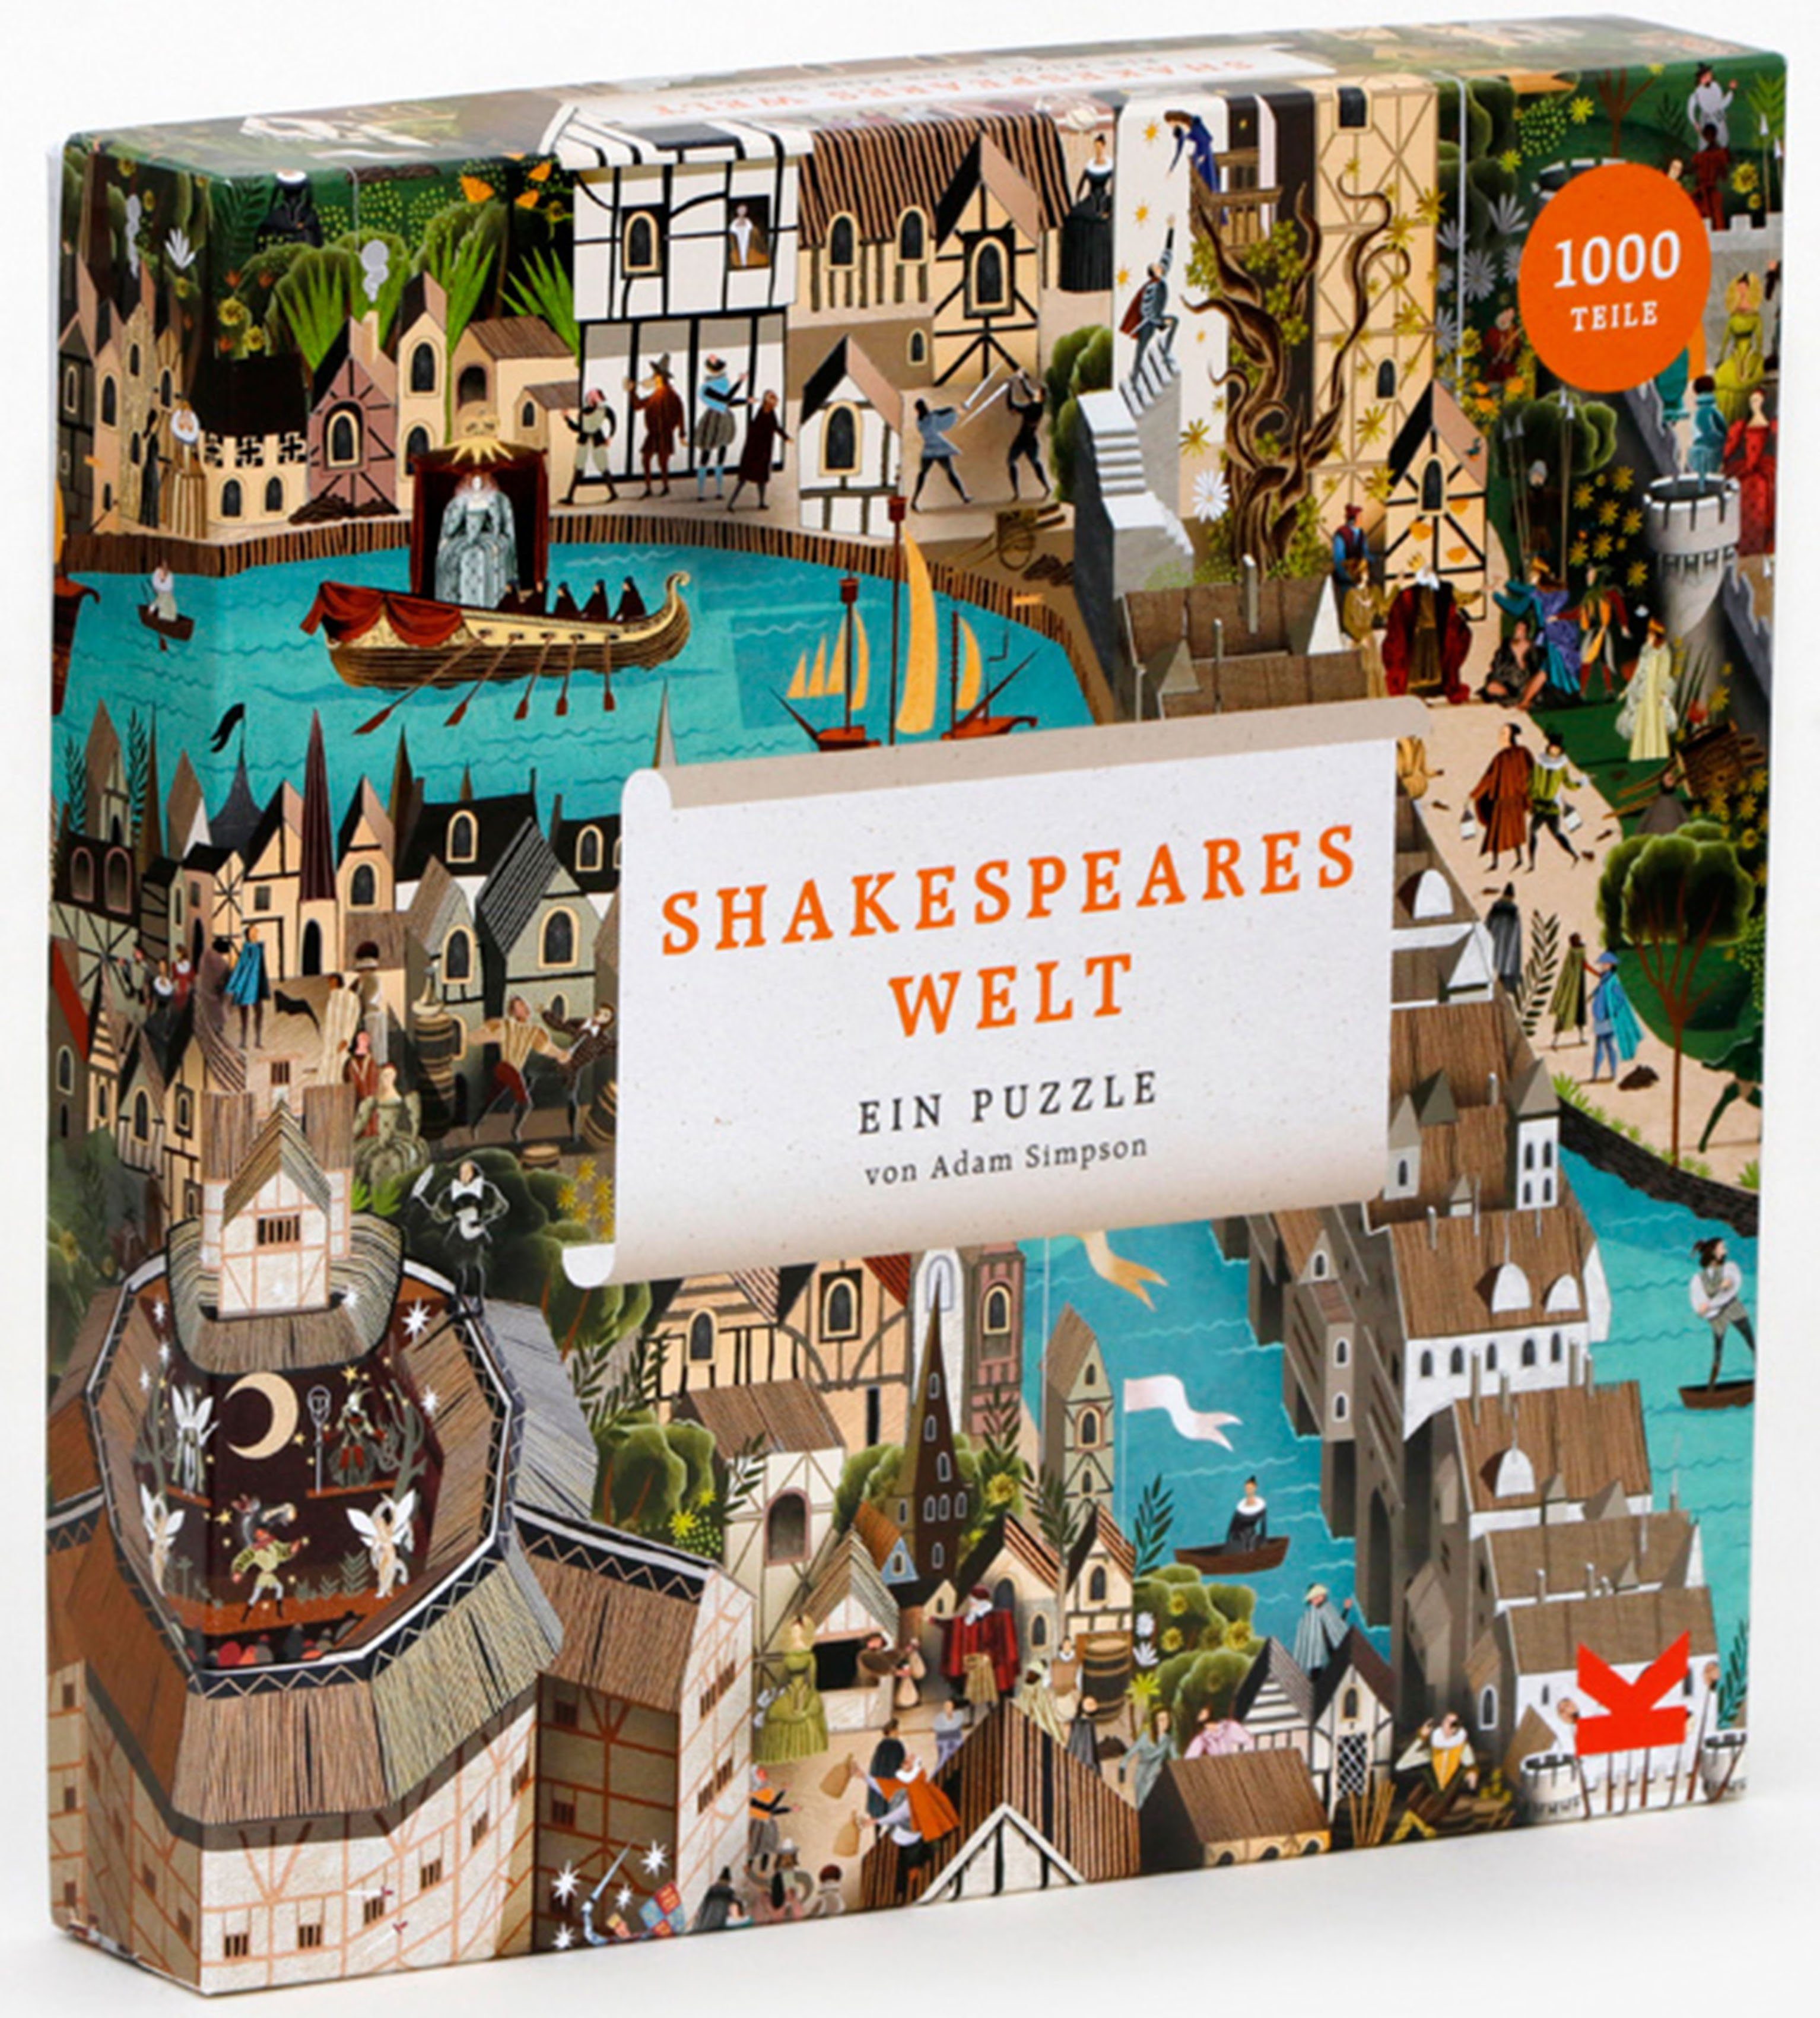 Laurence Puzzleteile 1000 Puzzle Shakespeares Welt, King